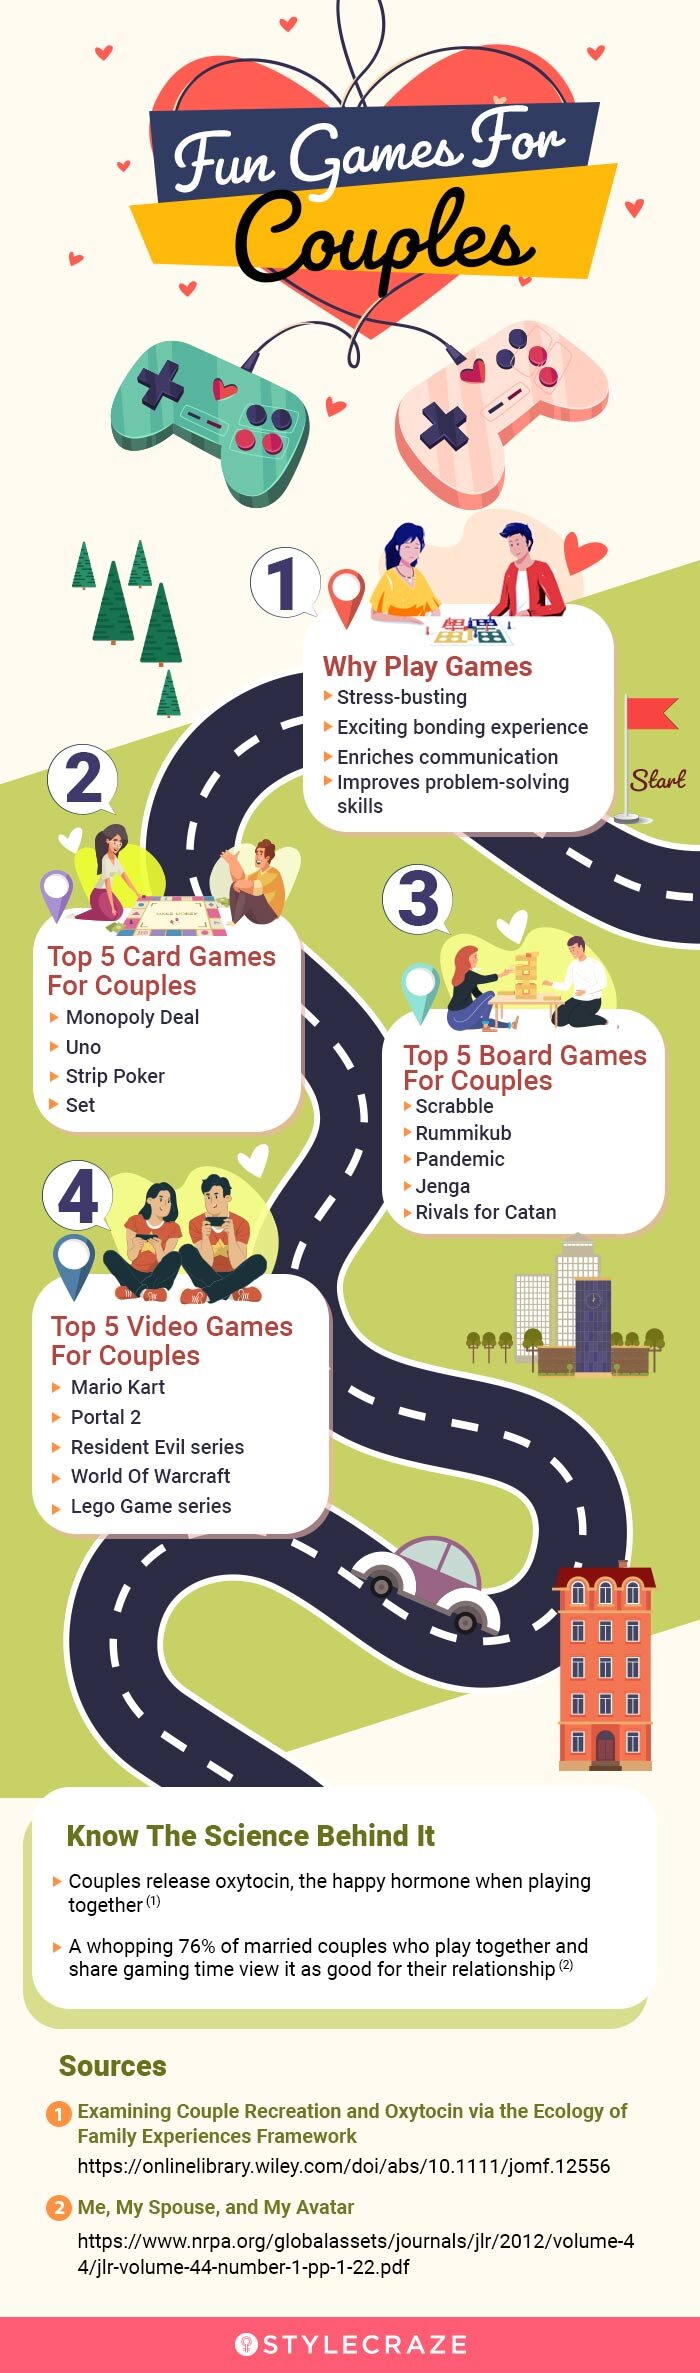 fun games for couples (infographic)